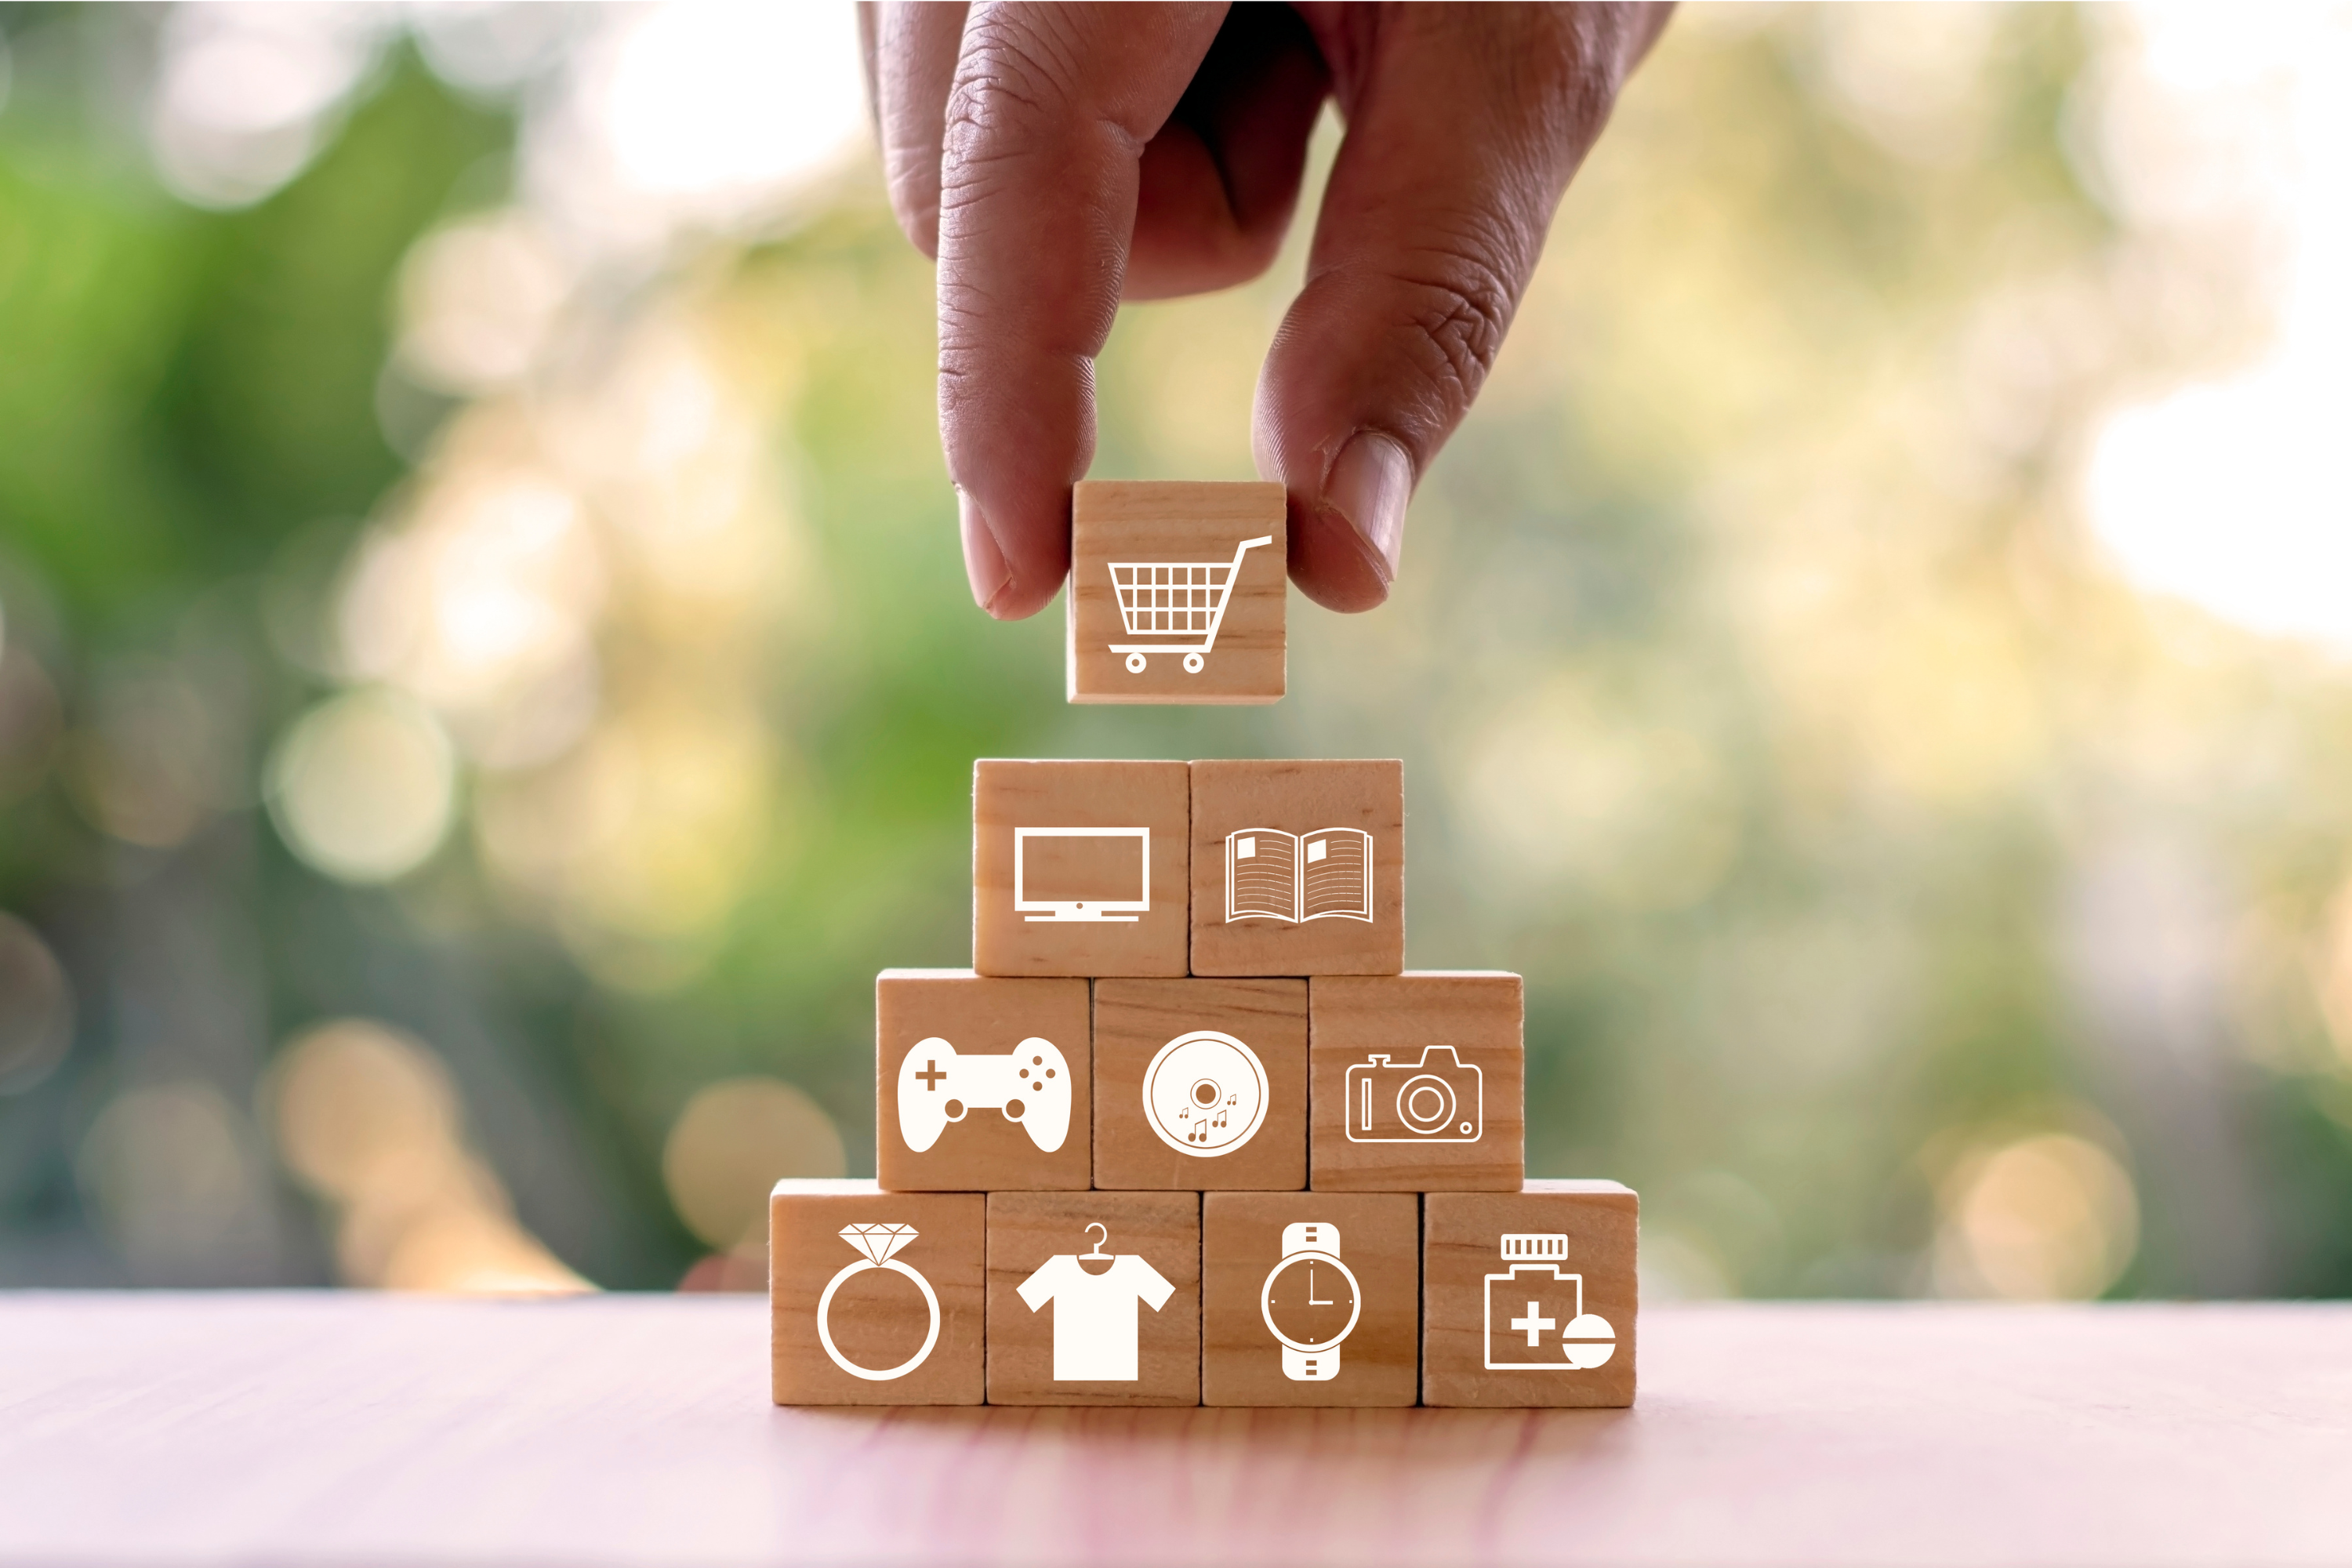 Building for the future: Consumer packaged goods (CPG) companies face multifaceted challenges